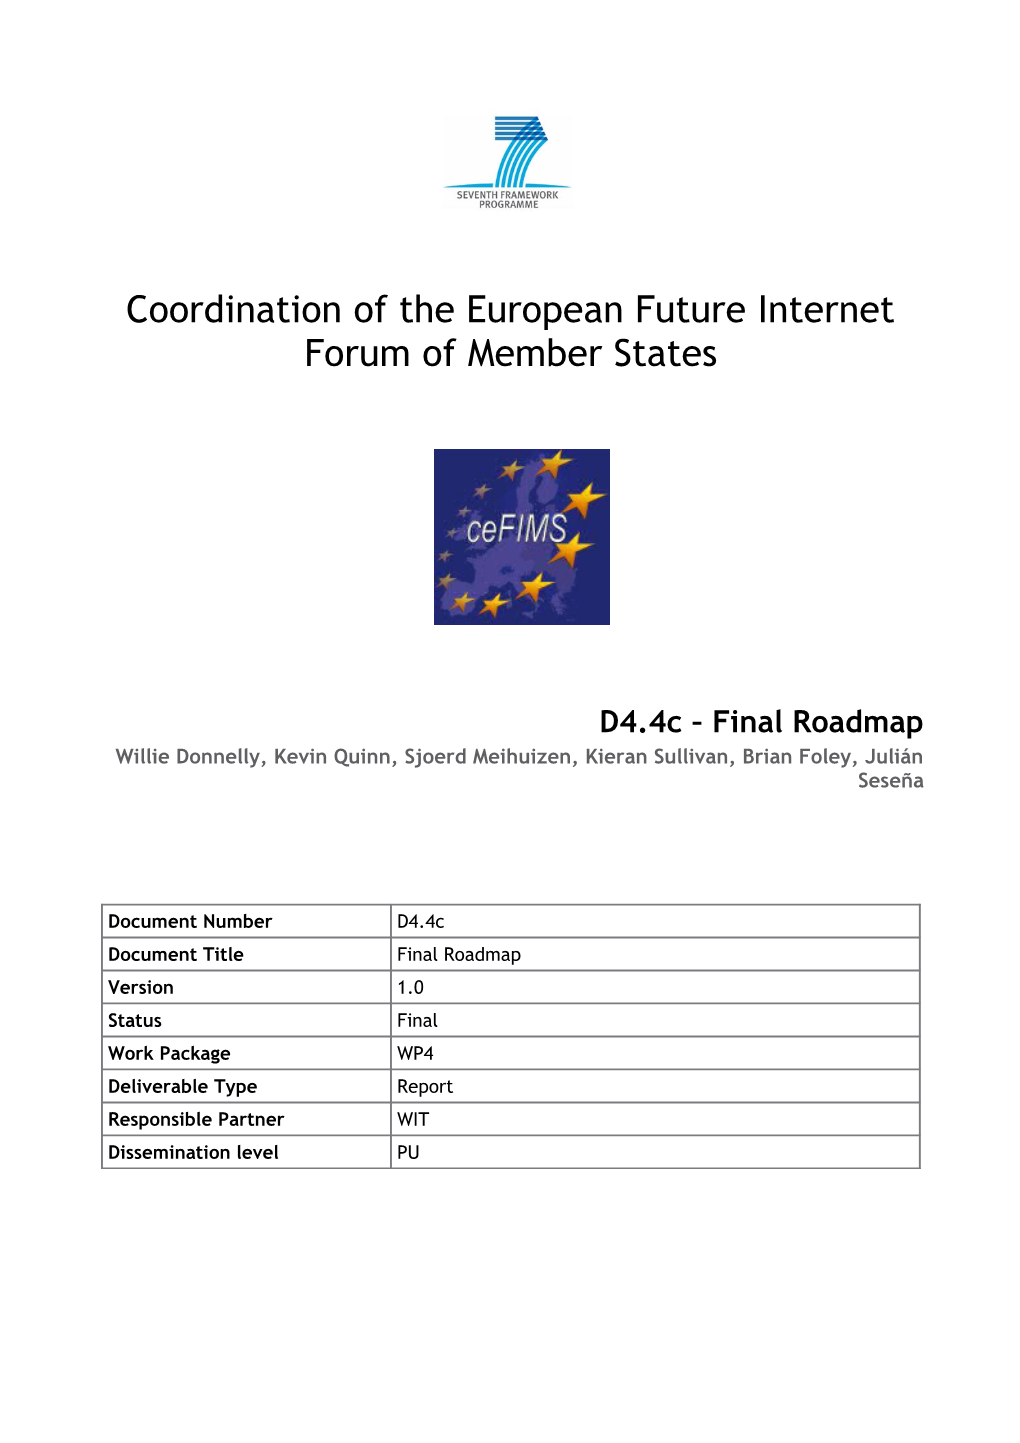 Coordination of the European Future Internet Forum of Member States